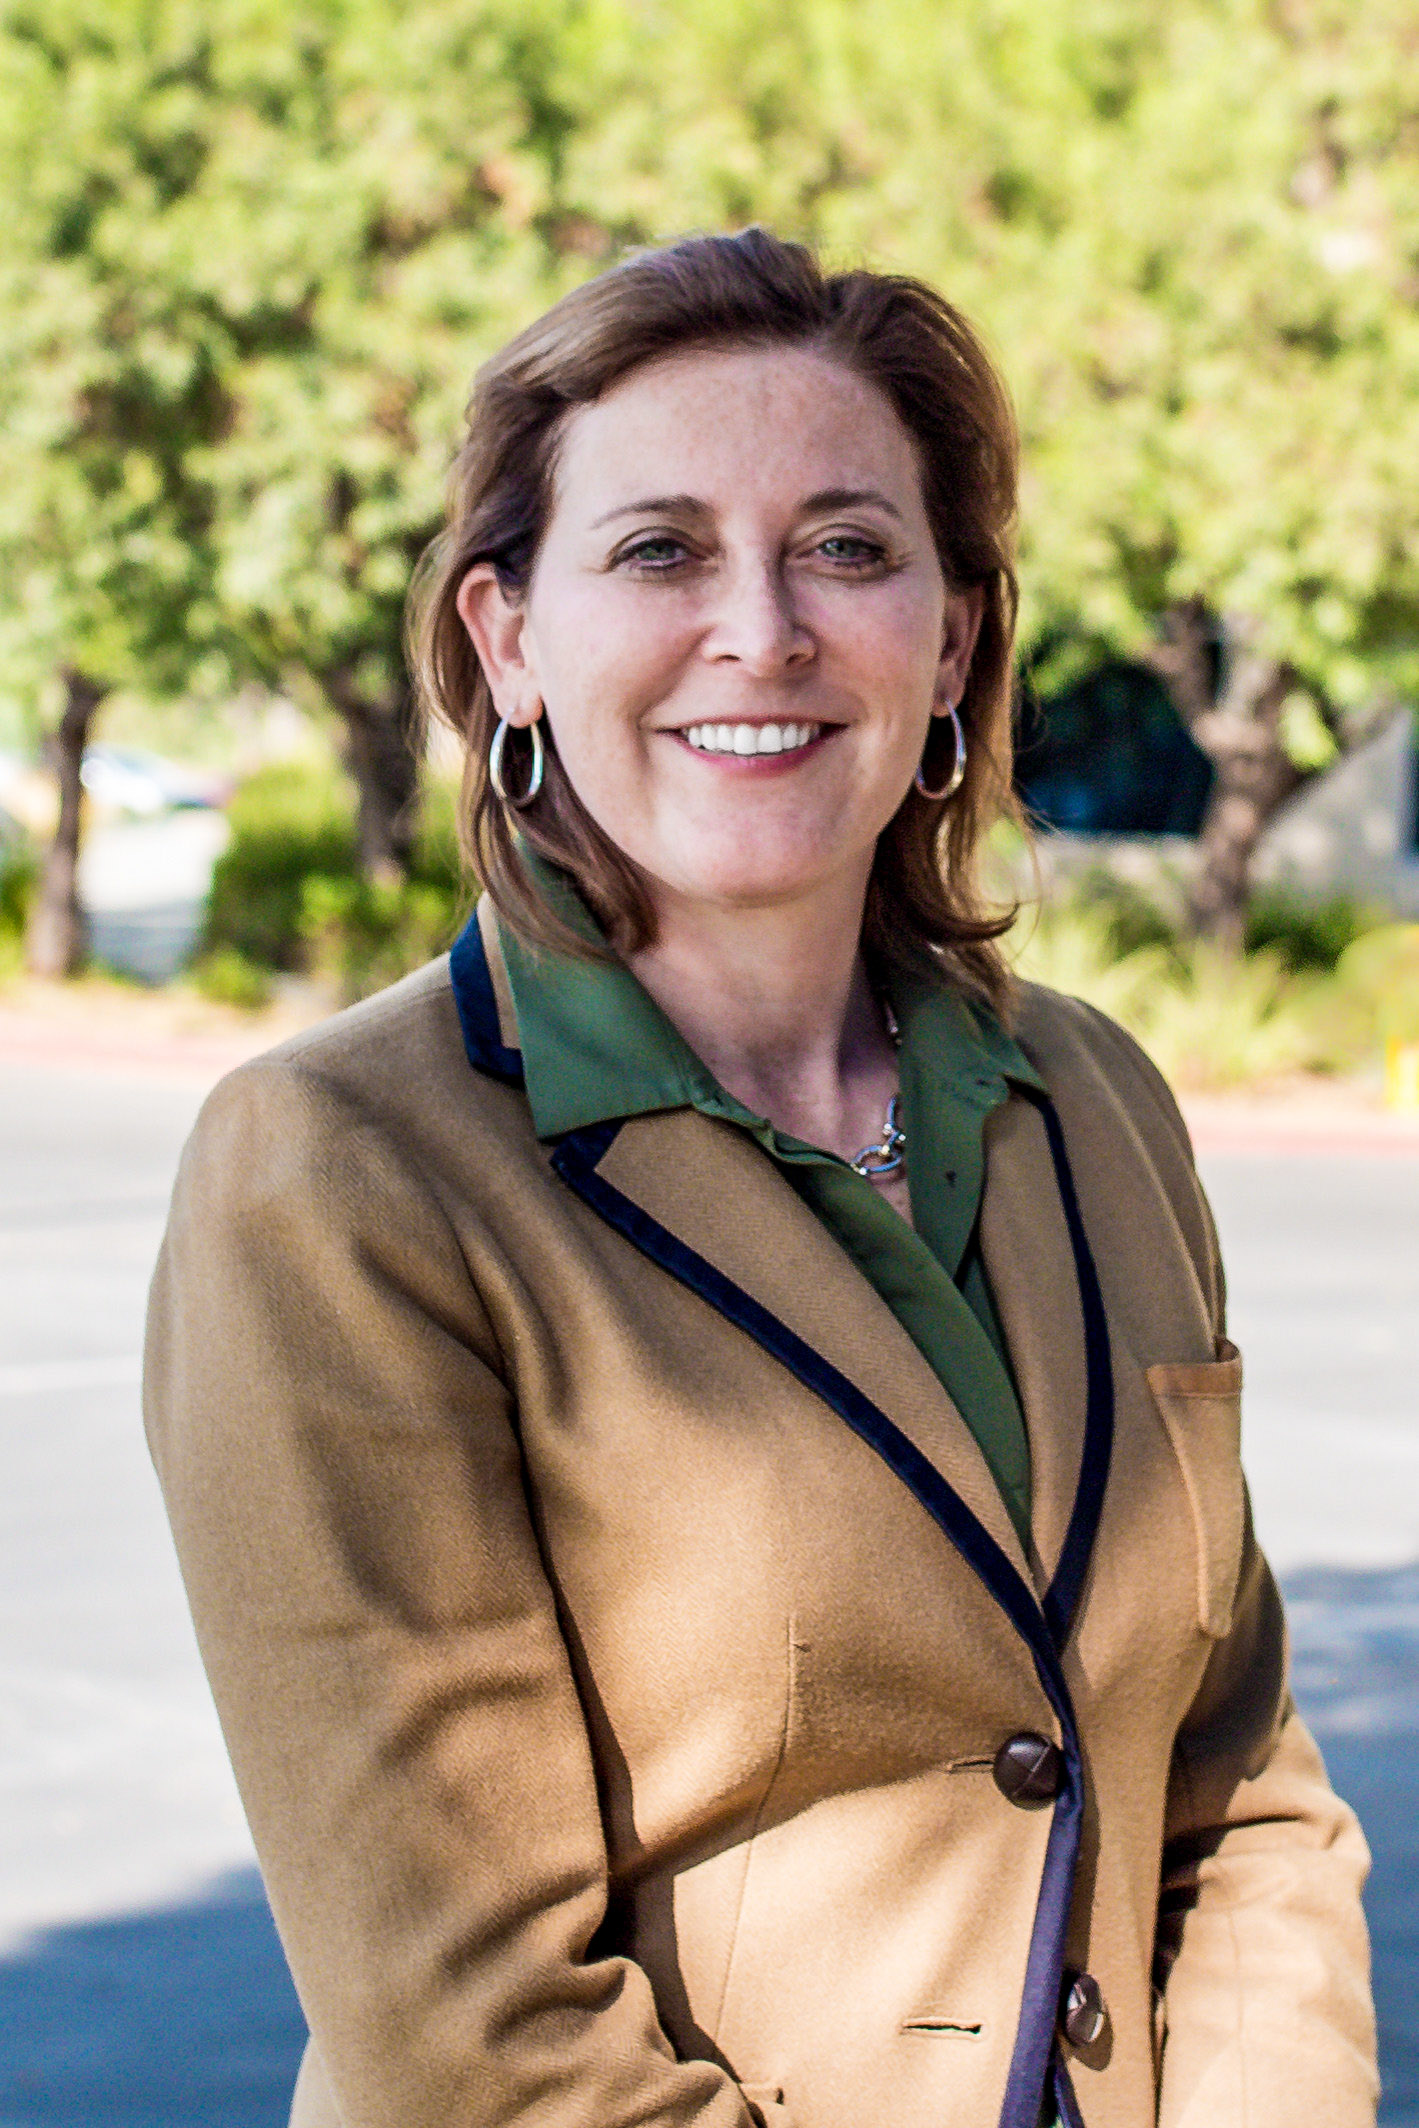 San Manuel Band of Mission Indians Chief Operating Officer Rikki Tanenbaum